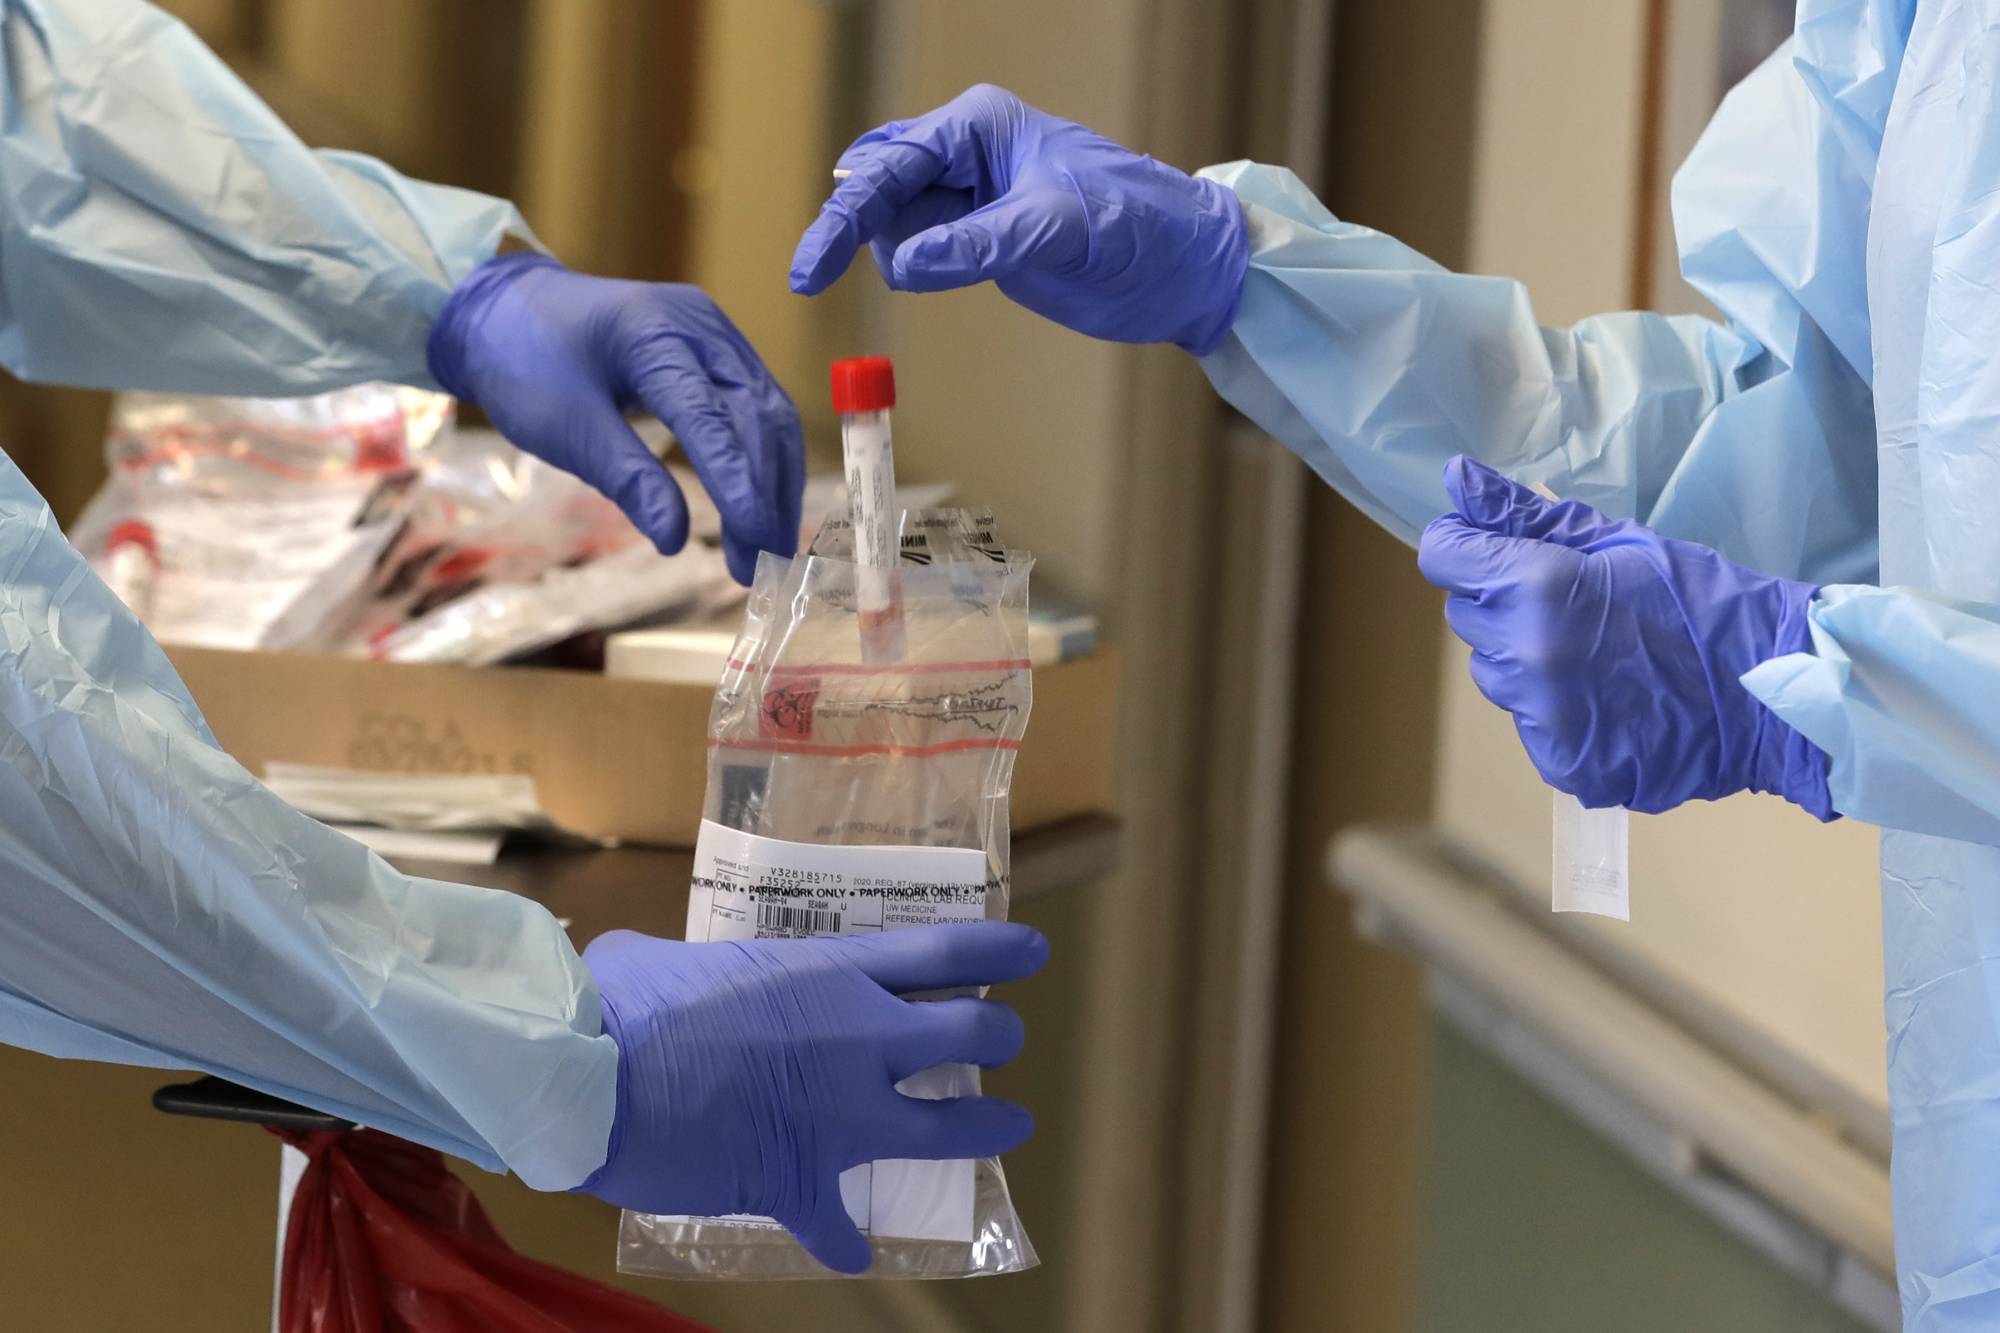 In this Friday, April 17, 2020, photo, a vial used to collect a nose swab sample is put into a collection bag as members of a team of University of Washington medical providers conduct coronavirus testing at Queen Anne Healthcare, a skilled nursing and rehabilitation facility in Seattle. More than 100 residents were tested during the visit, and the results for all were negative, according to officials. (AP Photo/Ted S. Warren)